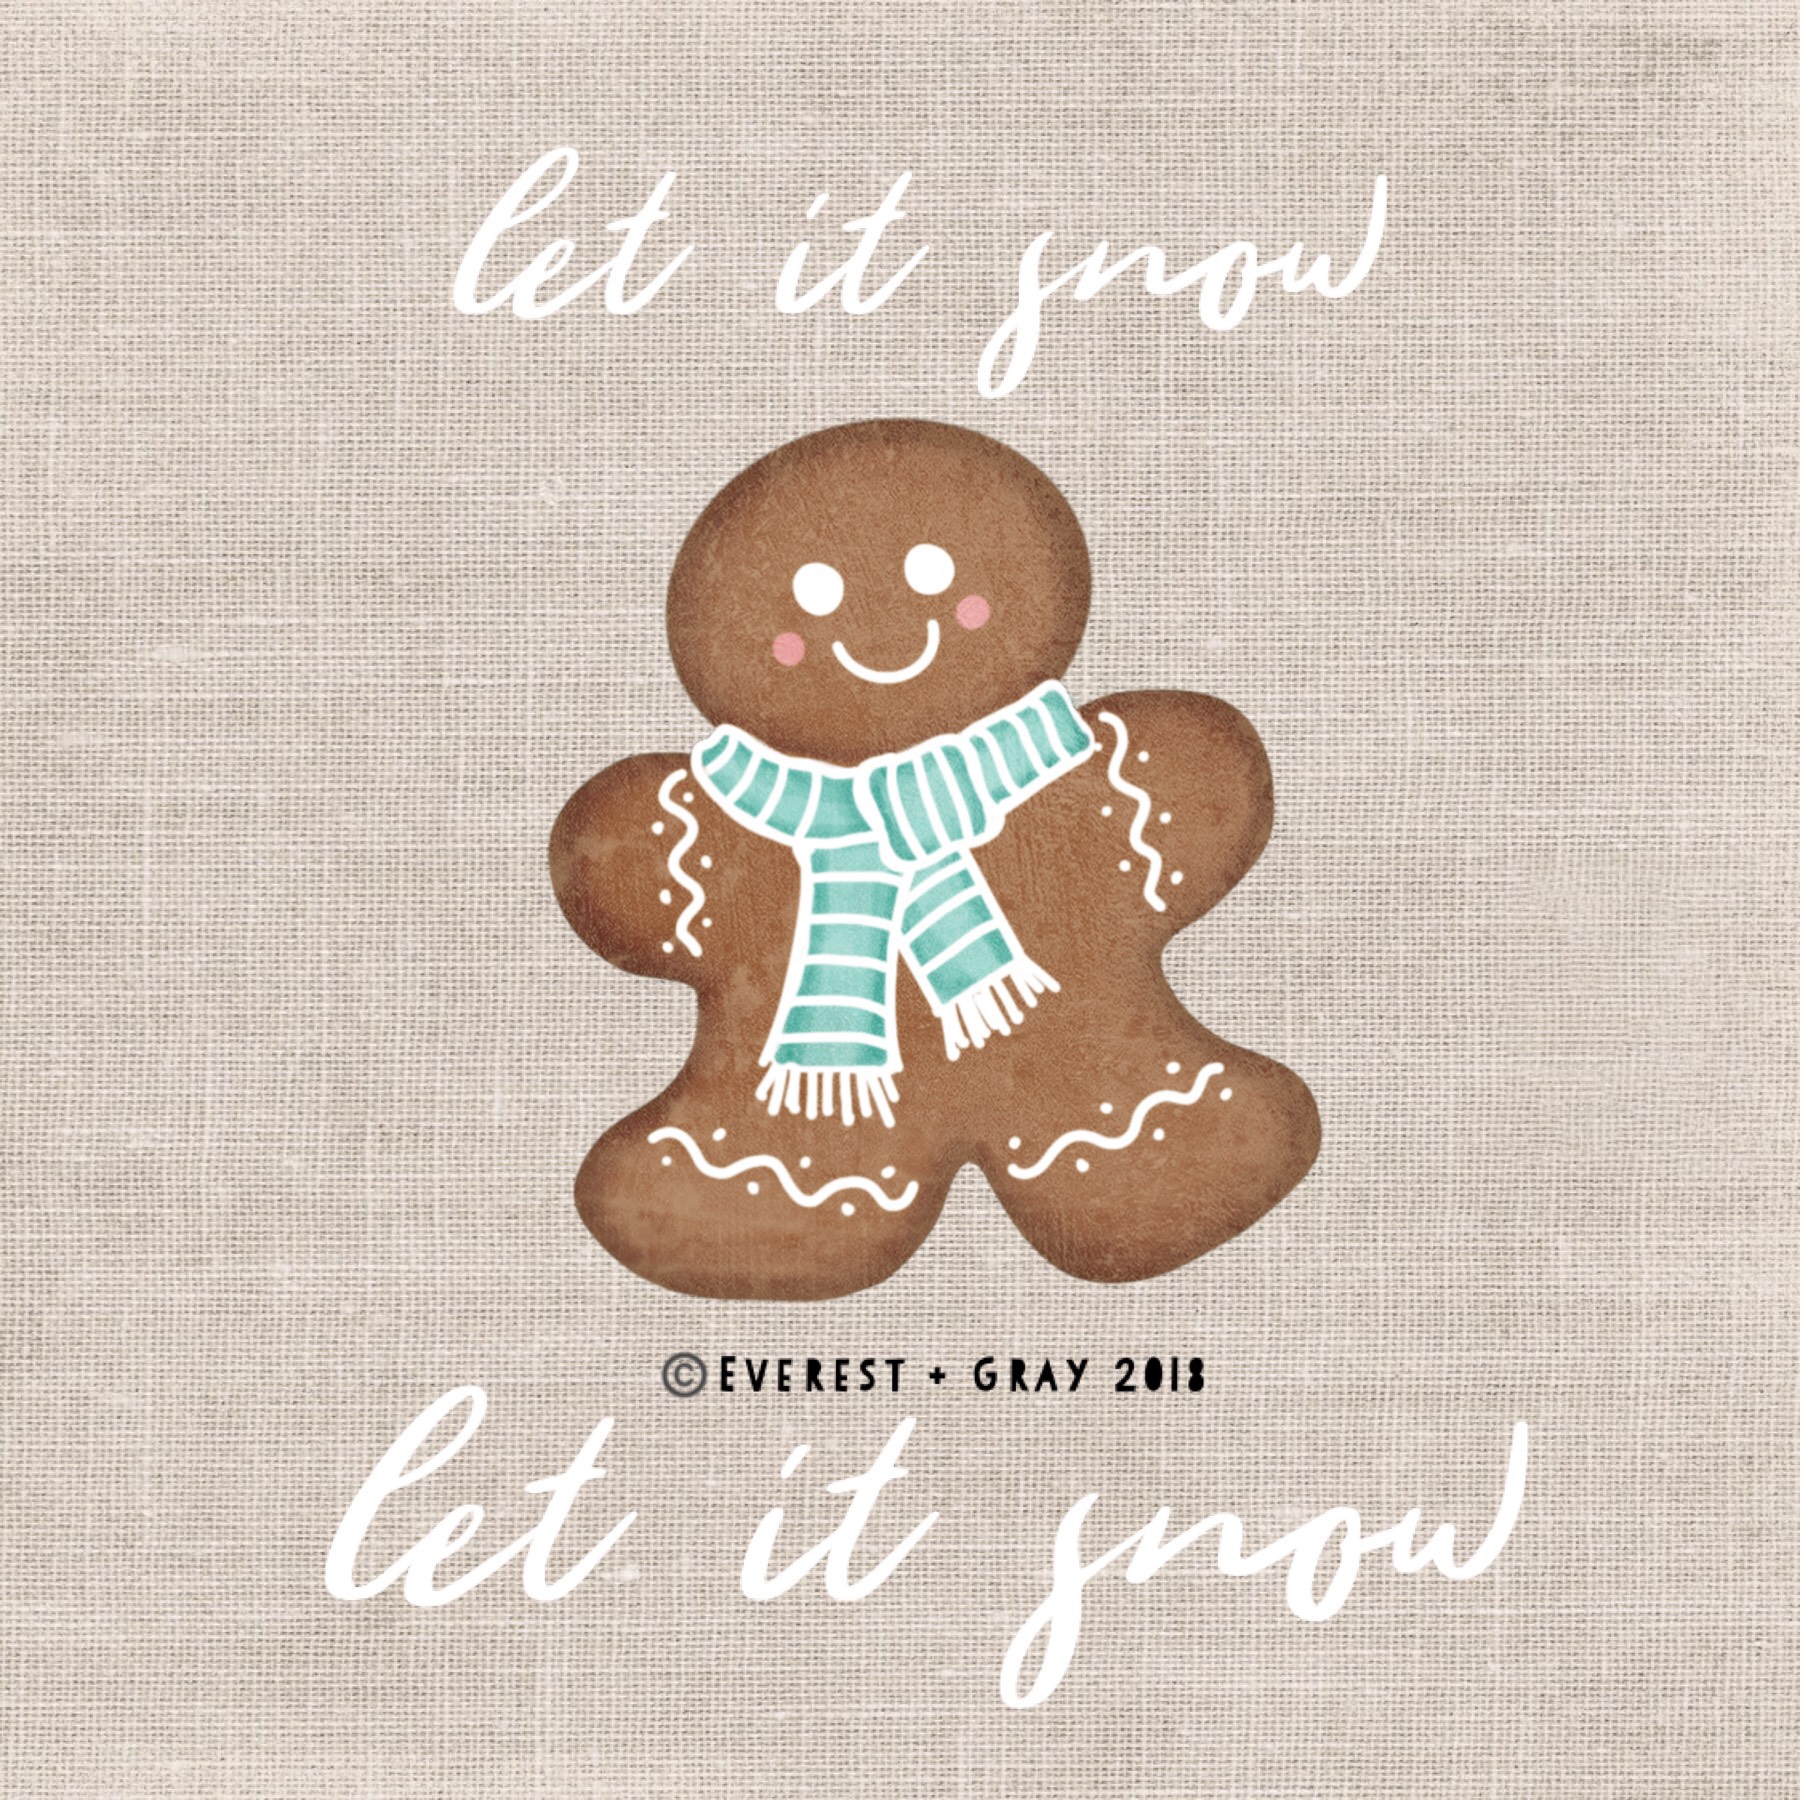 Let it Snow ⛄️ 
And who doesn’t love a cute gingerbread cookie?! ♥️
@piccollage @prisillay 
#piccollage #christmas #stickers #holiday #merrychristmas 